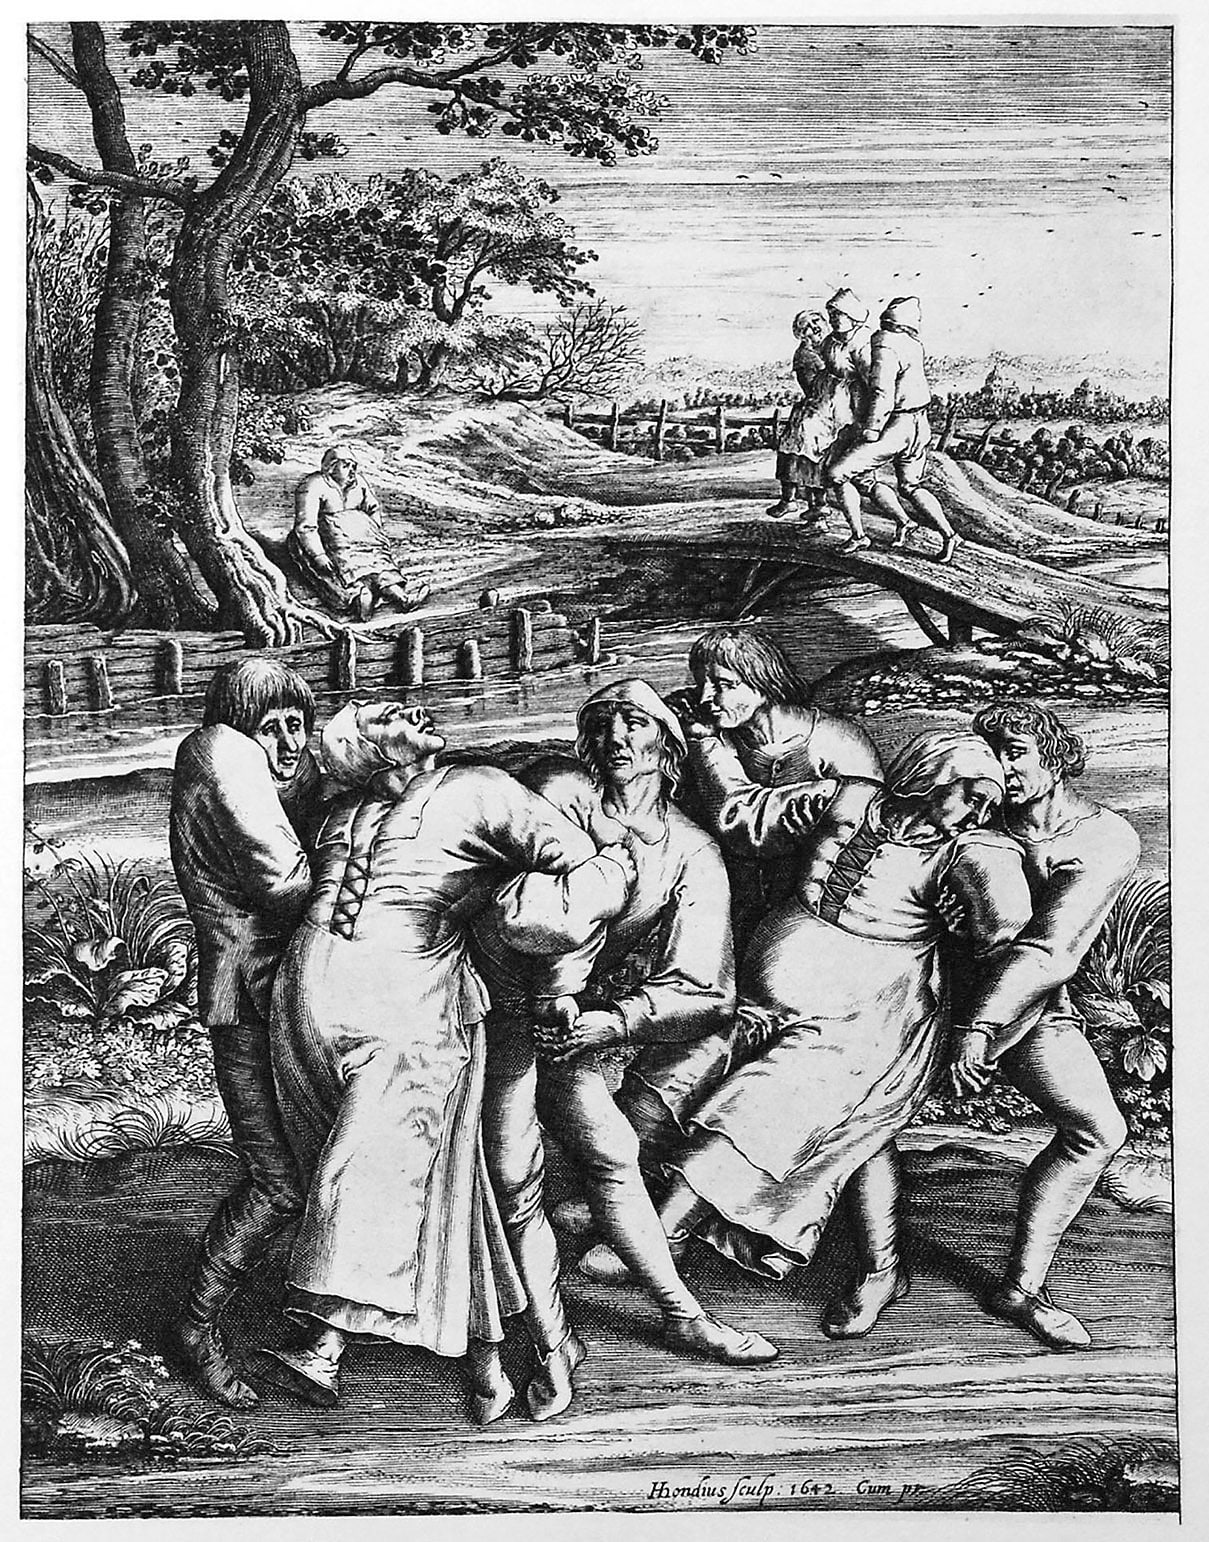 The dancing epidemic of 1518